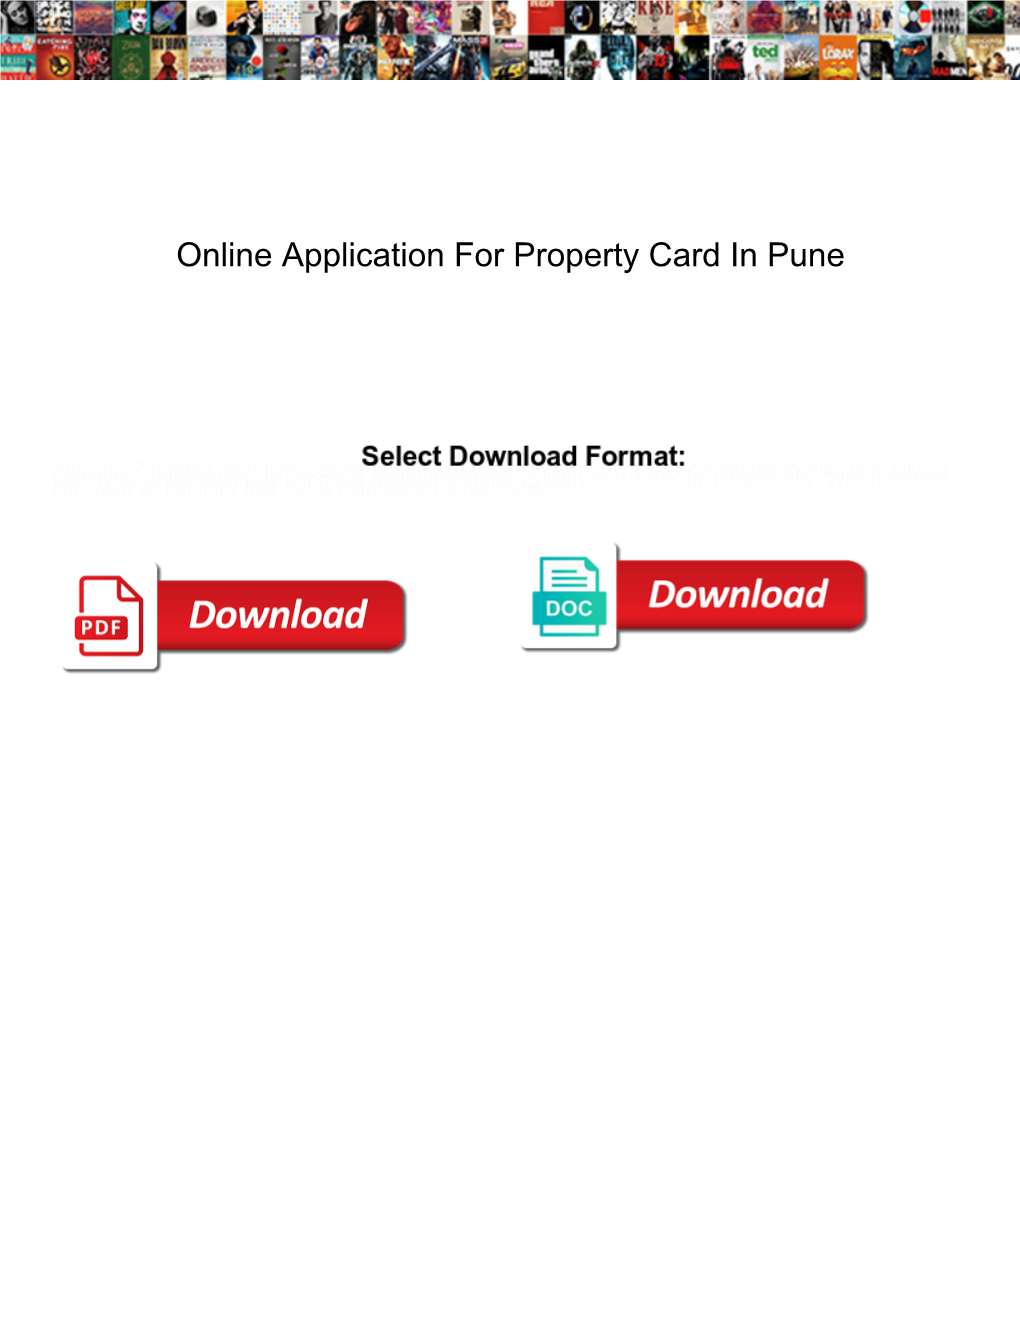 Online Application for Property Card in Pune